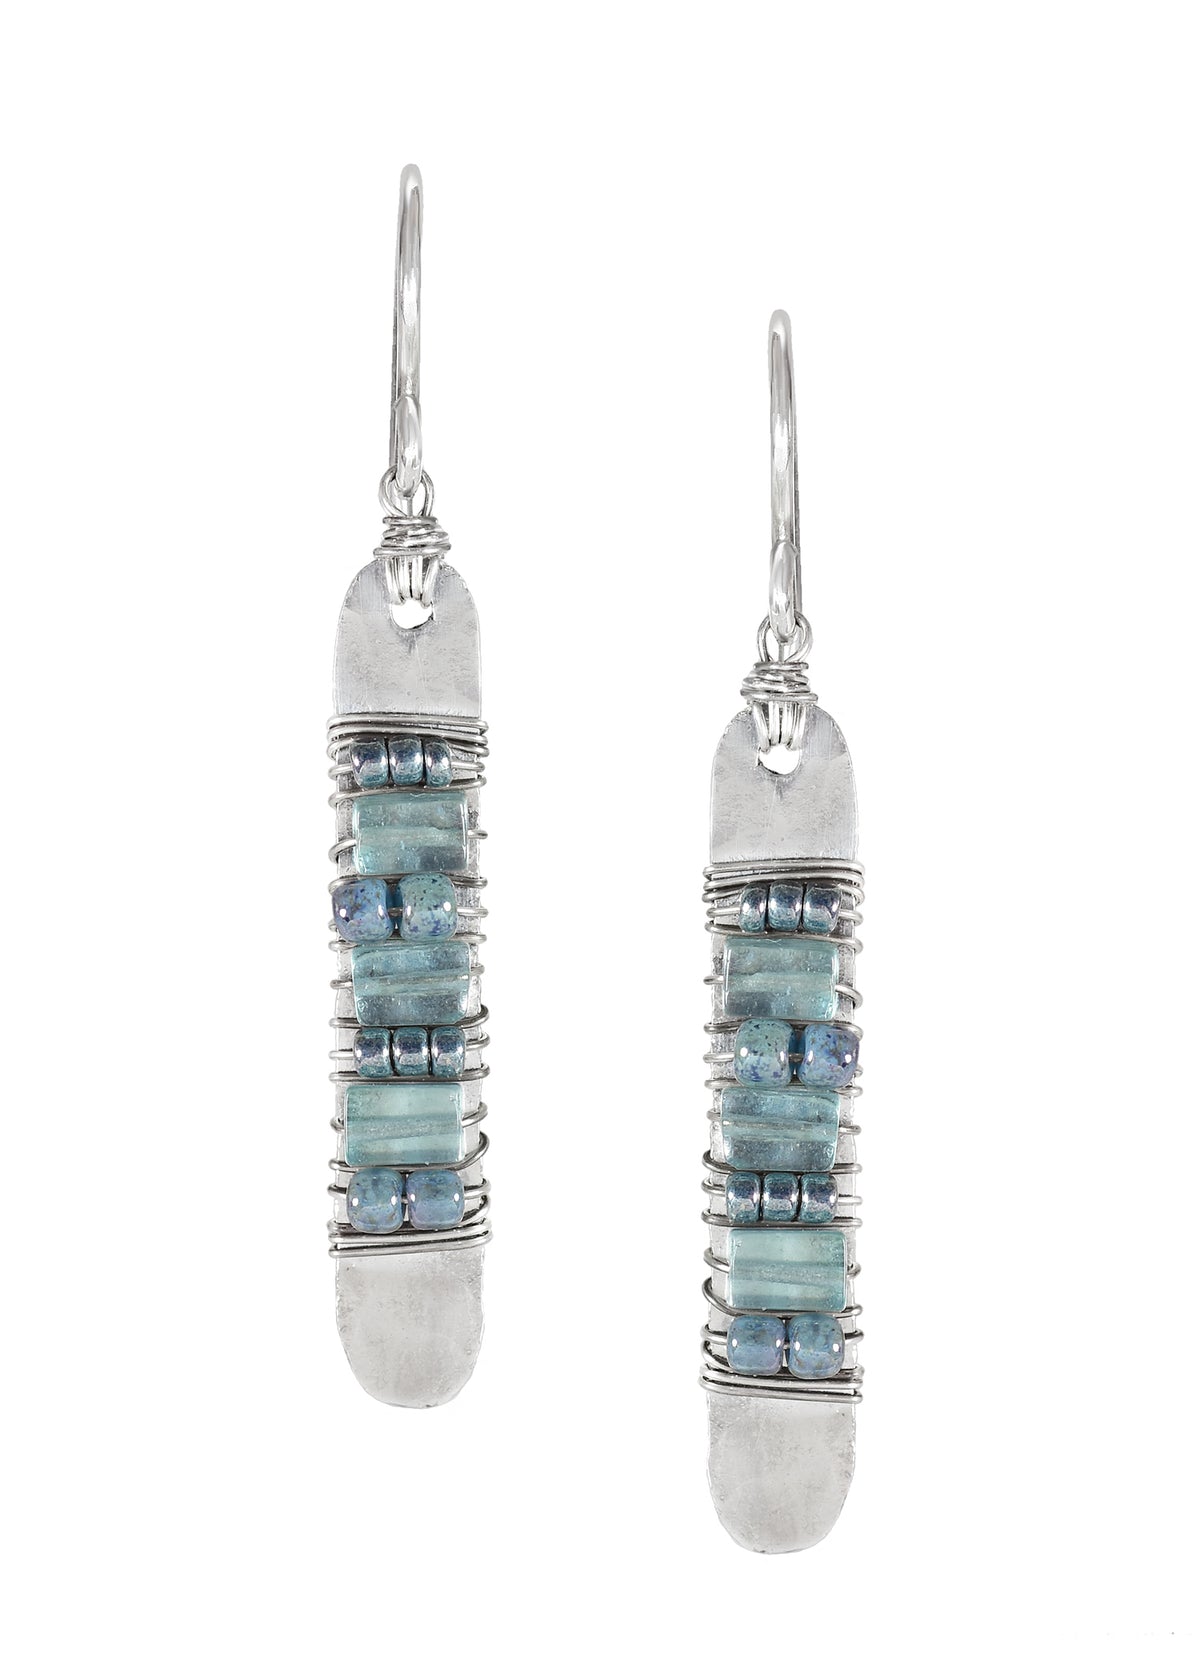 Apatite Seed beads Sterling silver Earrings measure 1-1/2&quot; in length (including the ear wires) and 3/16&quot; in width Handmade in our Los Angeles studio